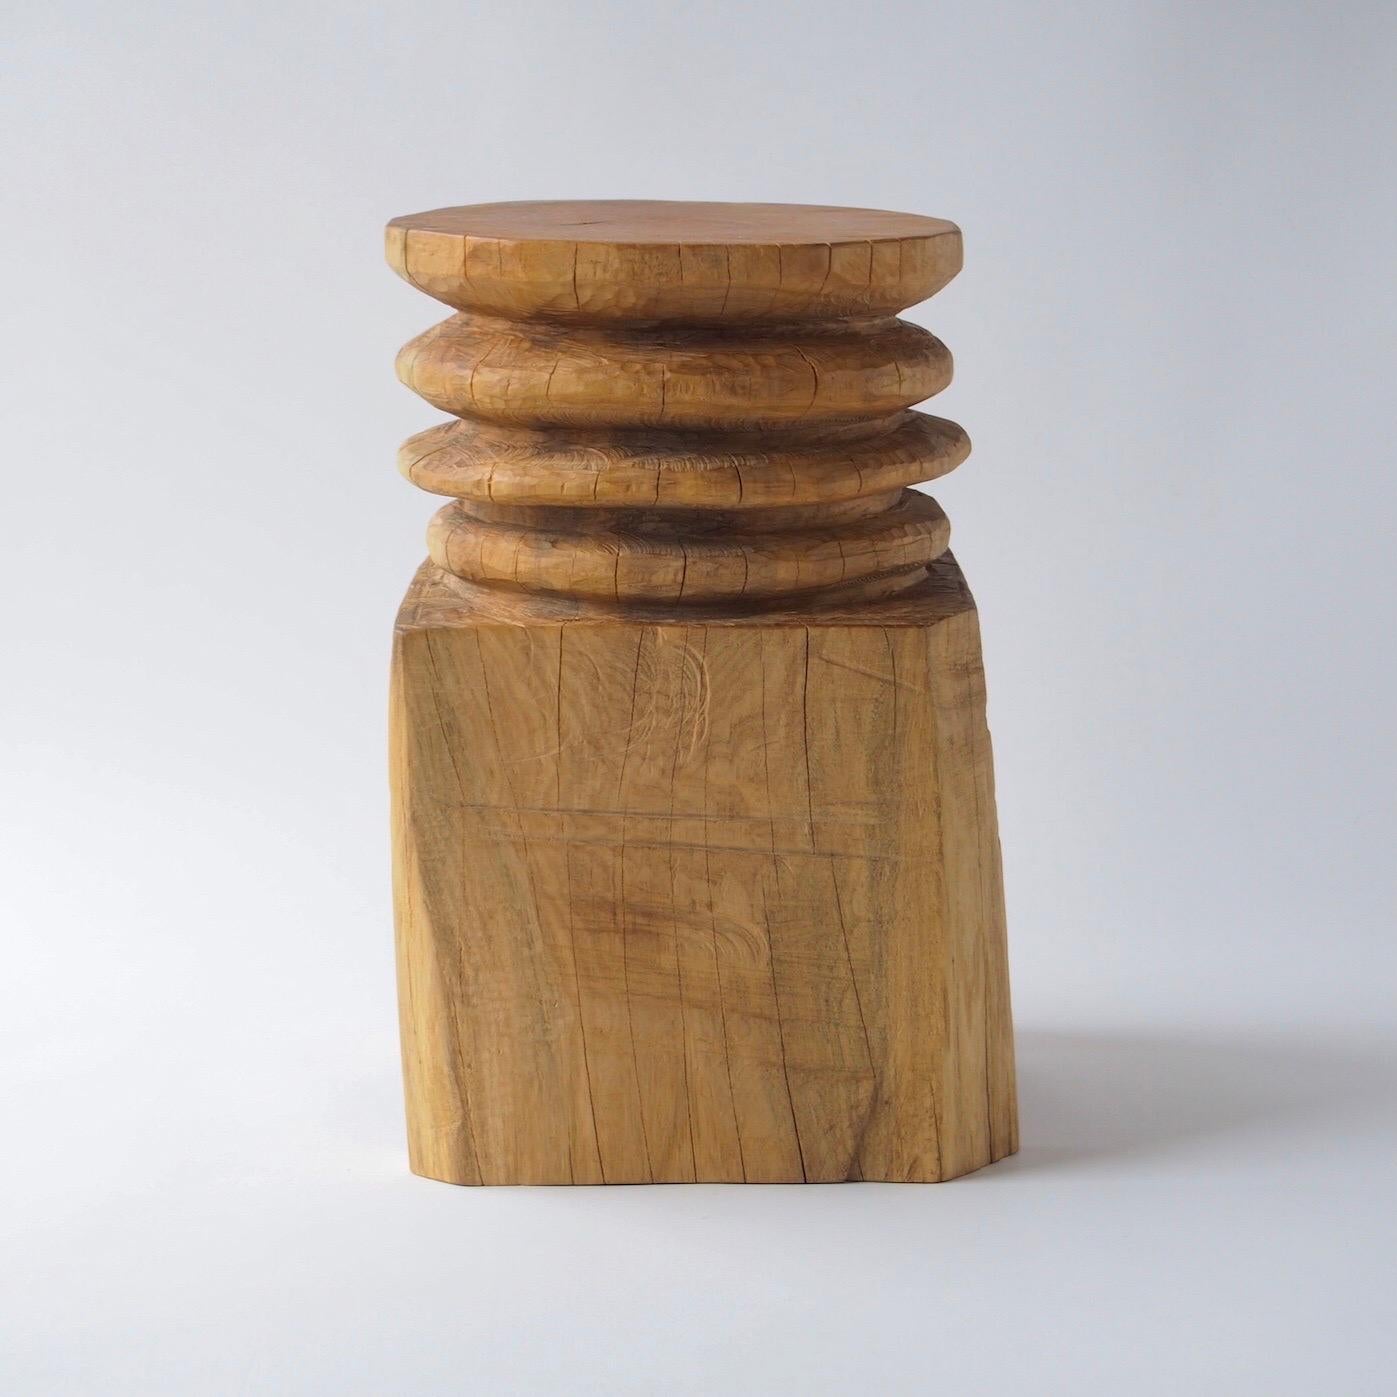 Hand-Carved Hiroyuki Nishimura Zougei Sculptural Side Table Stool 26 Tribal Glamping For Sale